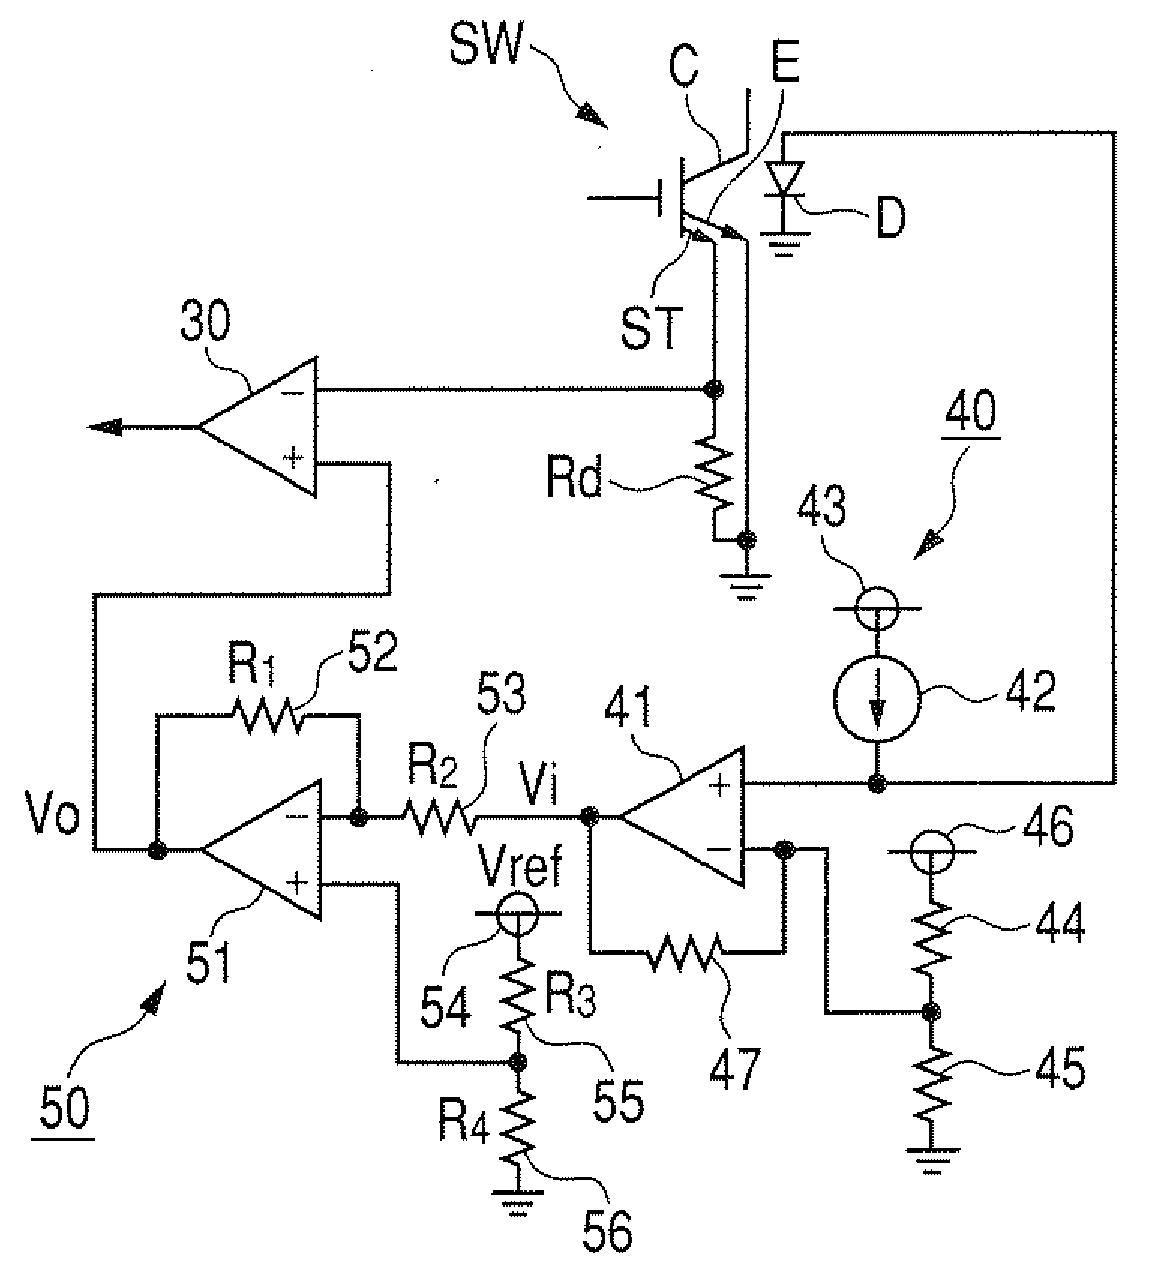 Switching element overcurrent protection circuit which operates within a high-voltage system that incorporates the switching element